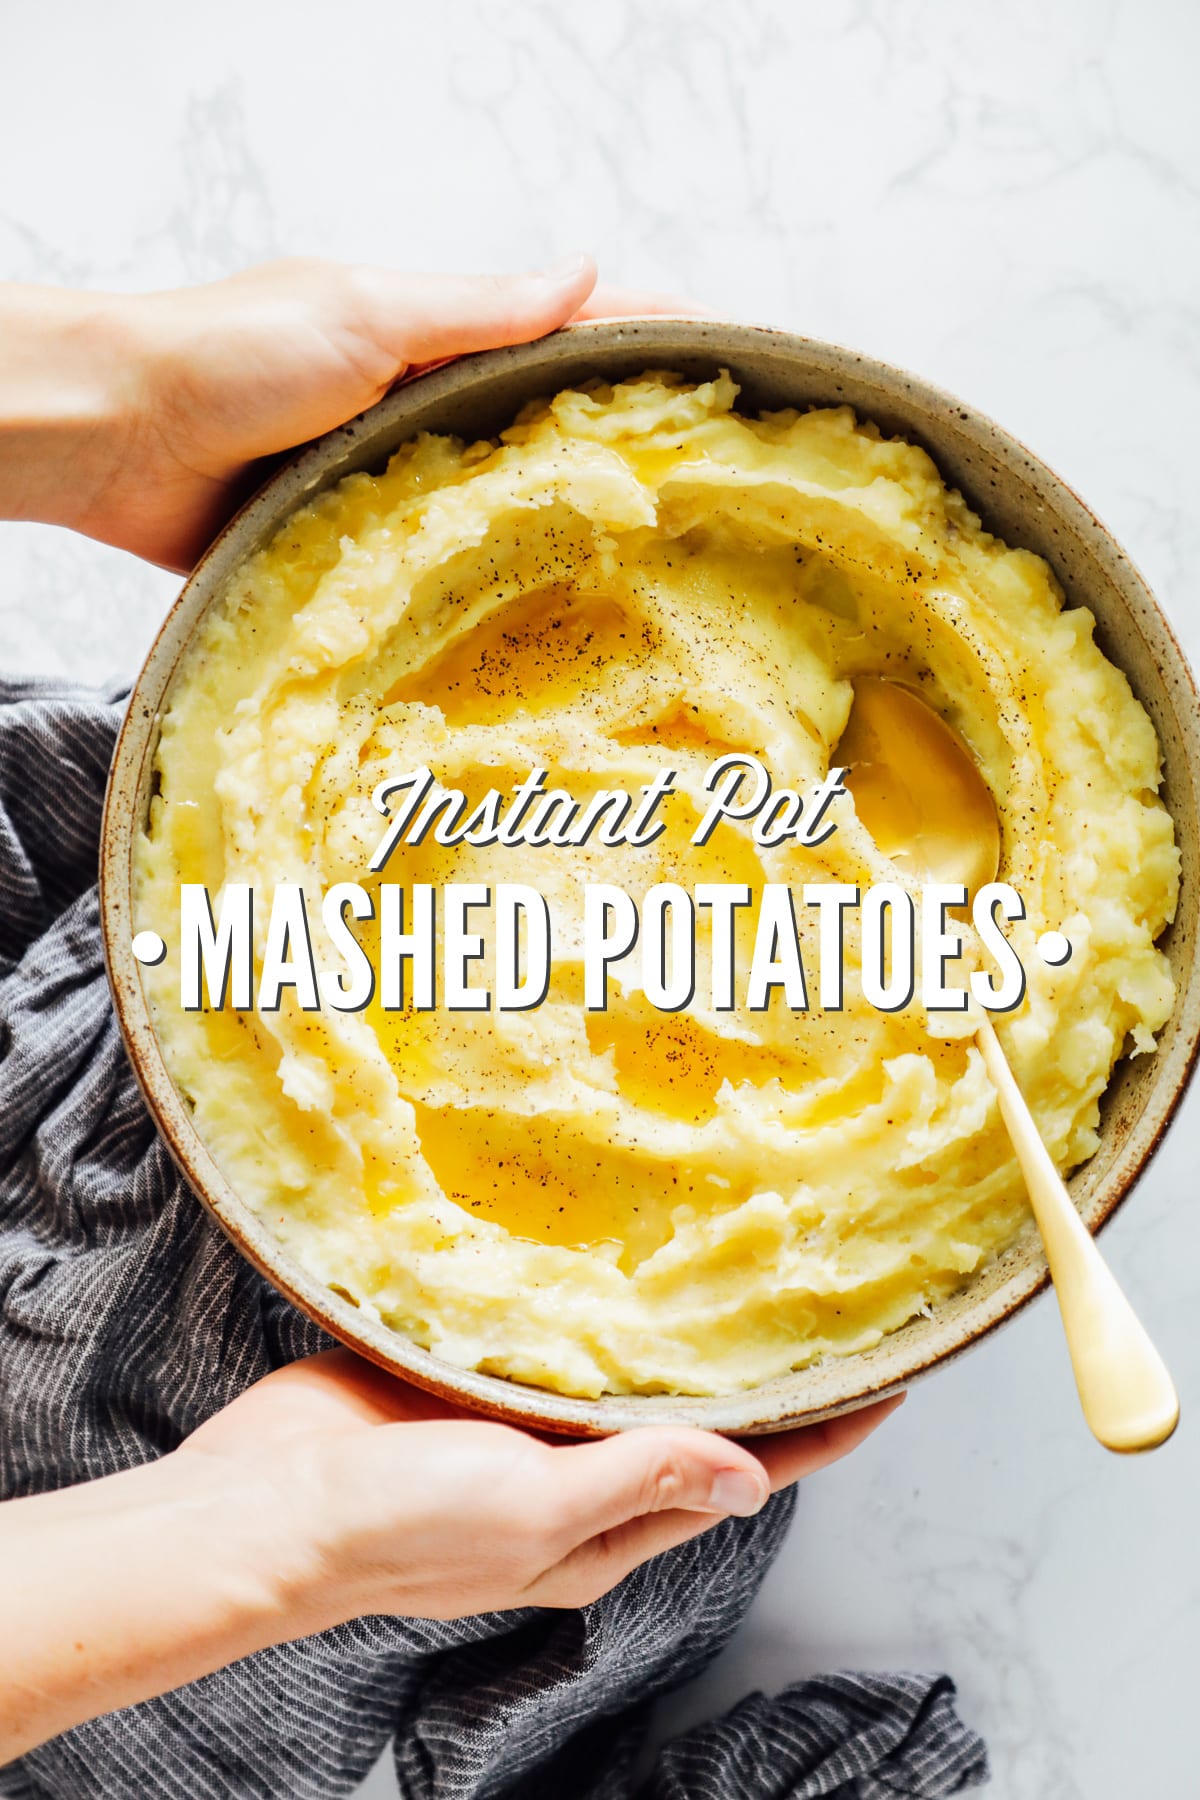 4 Ingredient Instant Pot Mashed Potatoes No Drain Pressure Cooker Recipe The Easiest Mashed Potatoes You Ll Ever Make Live Simply,Chinese Checkers Strategy